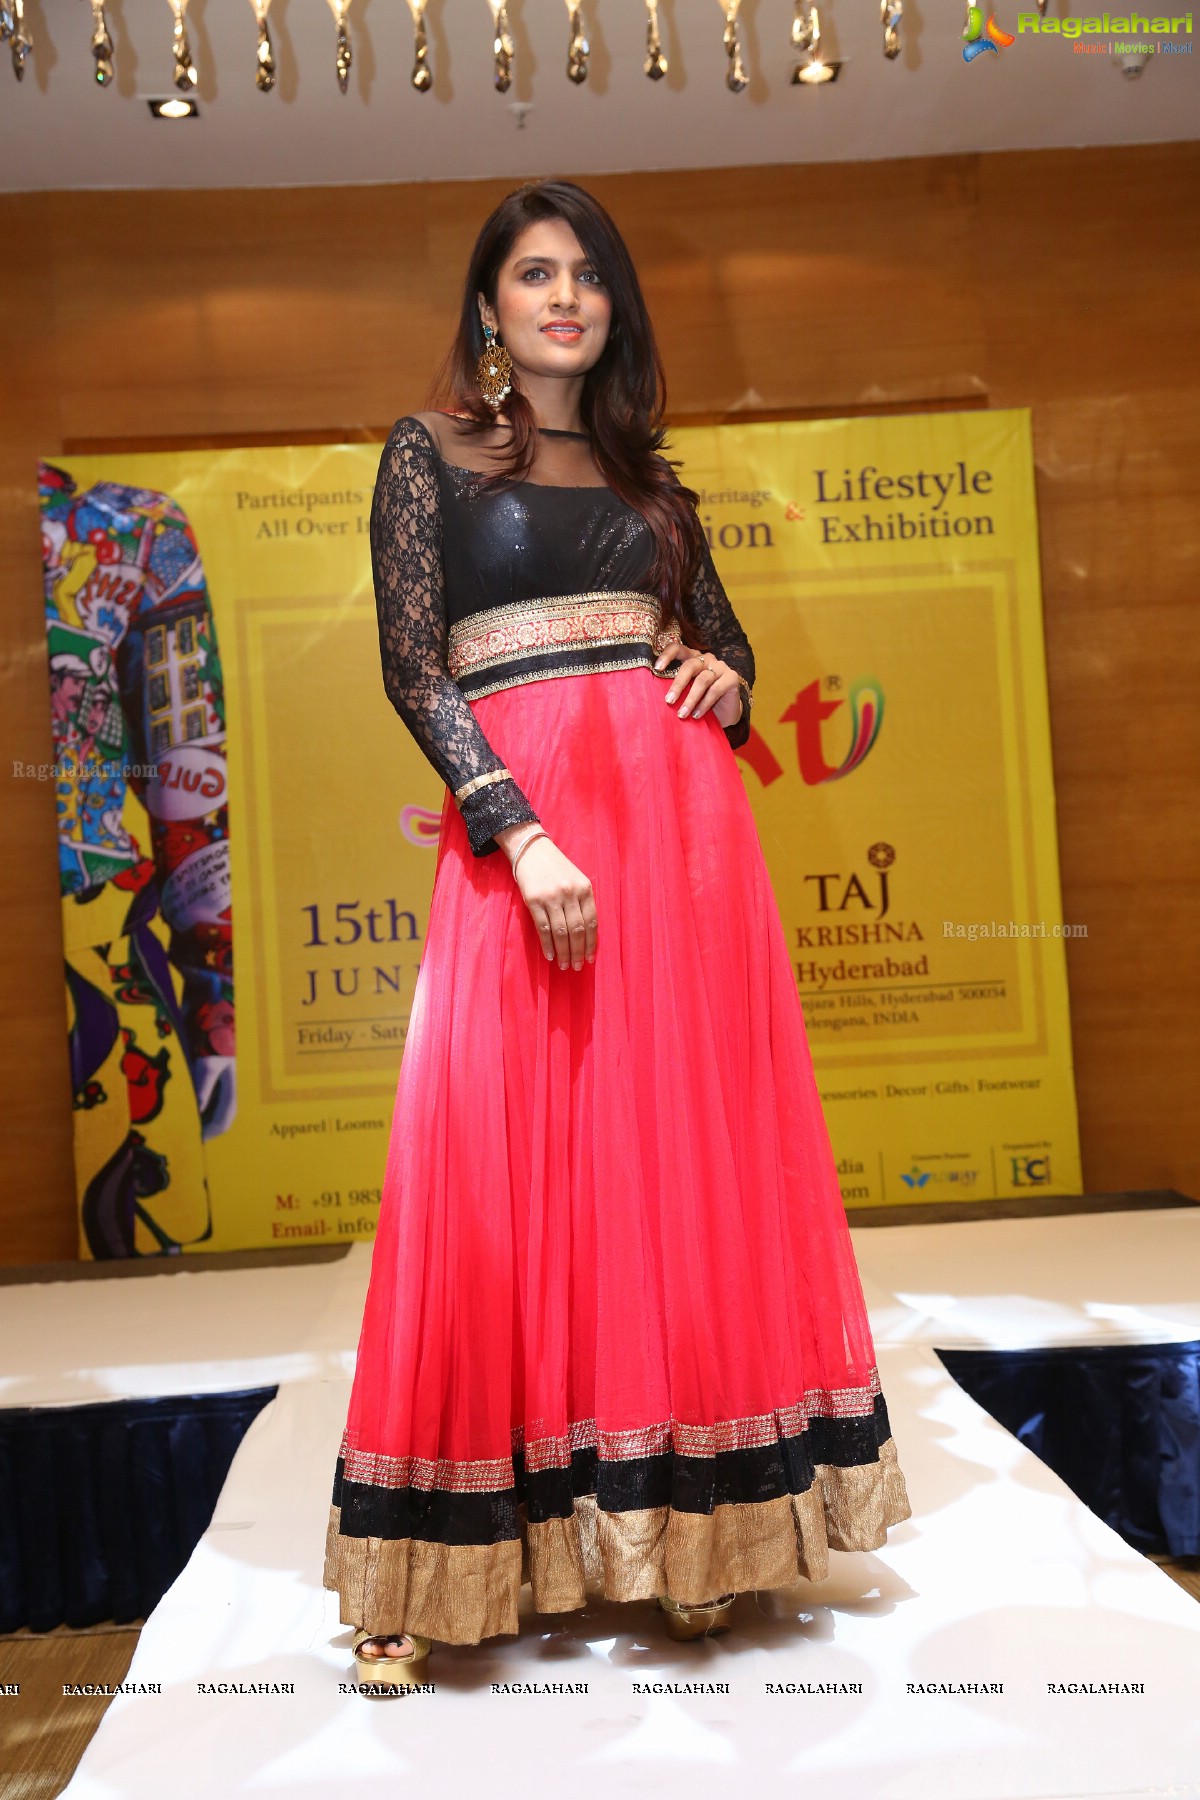 Fashion Show at Logo Unveiling of HAAT - India's Premium Heritage Fashion Exhibition at Hotel Marigold